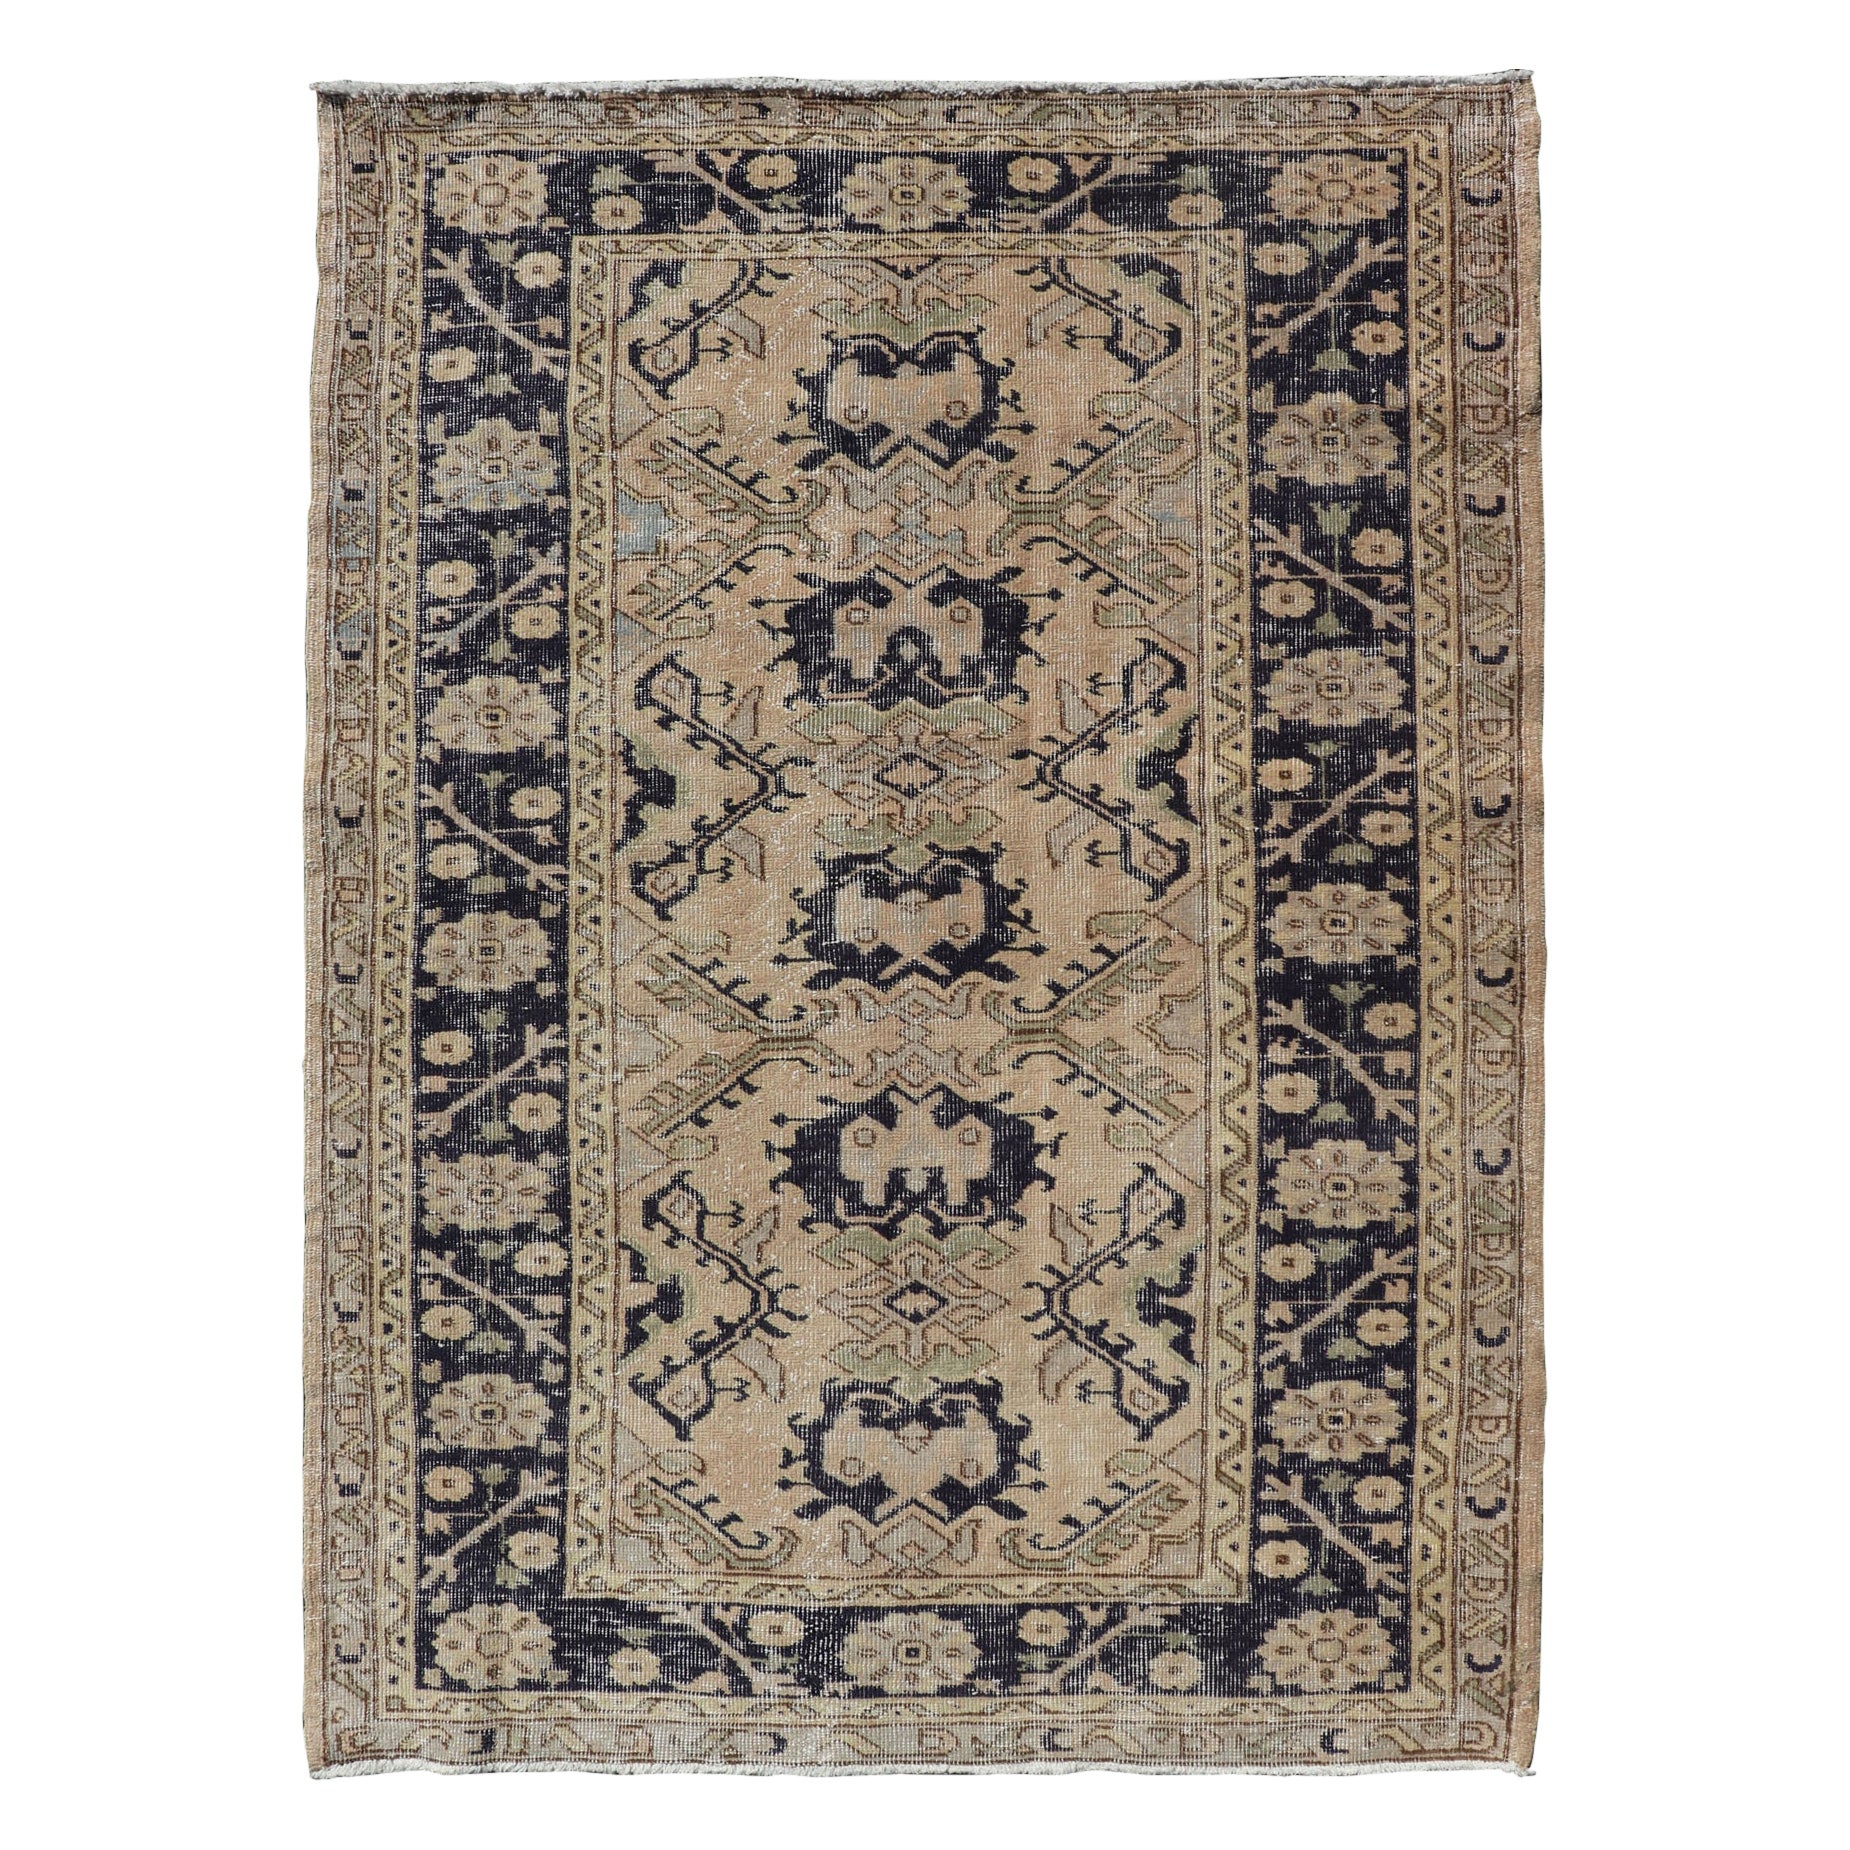 Vintage Turkish Oushak Rug with All-Over Sub-Geometric Medallion Design in Blue